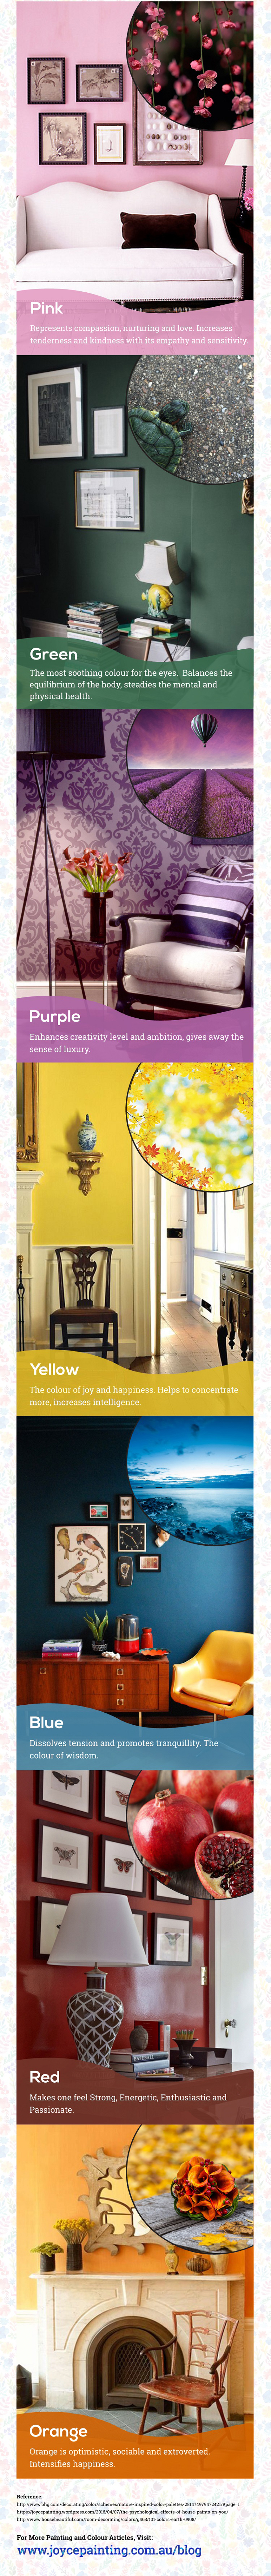 Paint Your Walls with the Colours from Nature [Infographic]